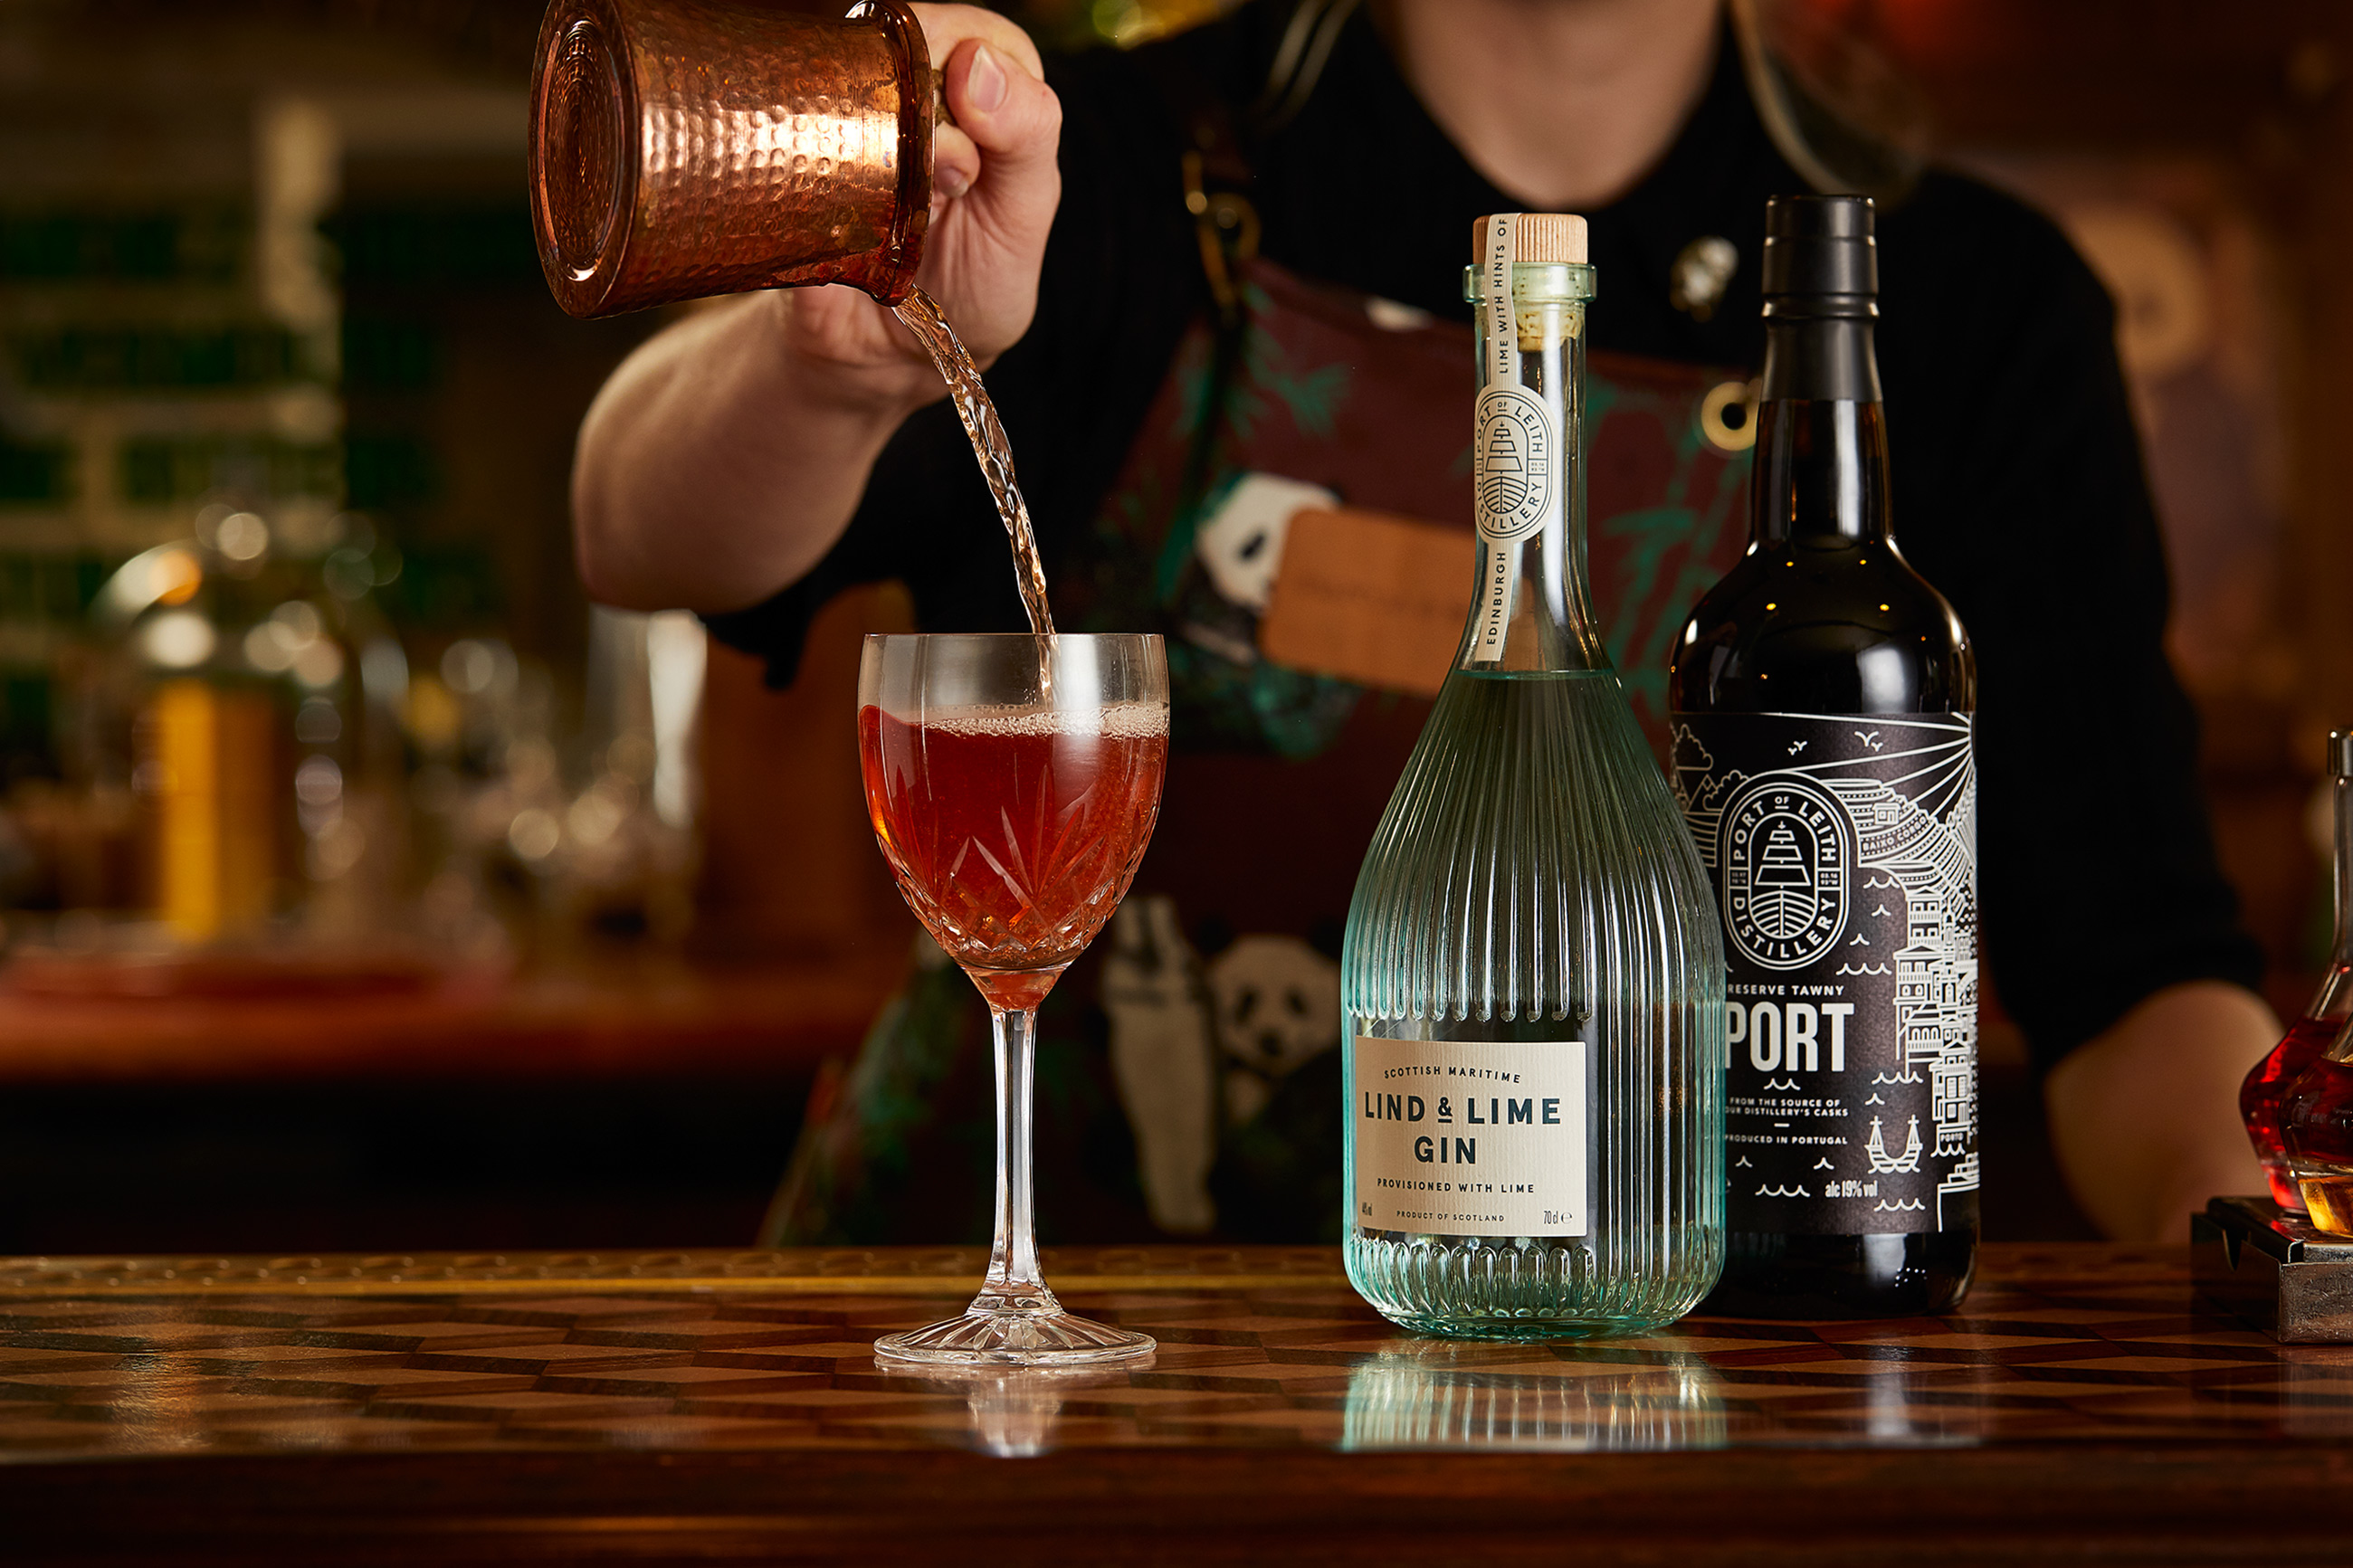 Hot Gin Punch Lind and Lime Gin at Panda and Sons. Edinburgh food and drink photographer, Alastair Ferrier.